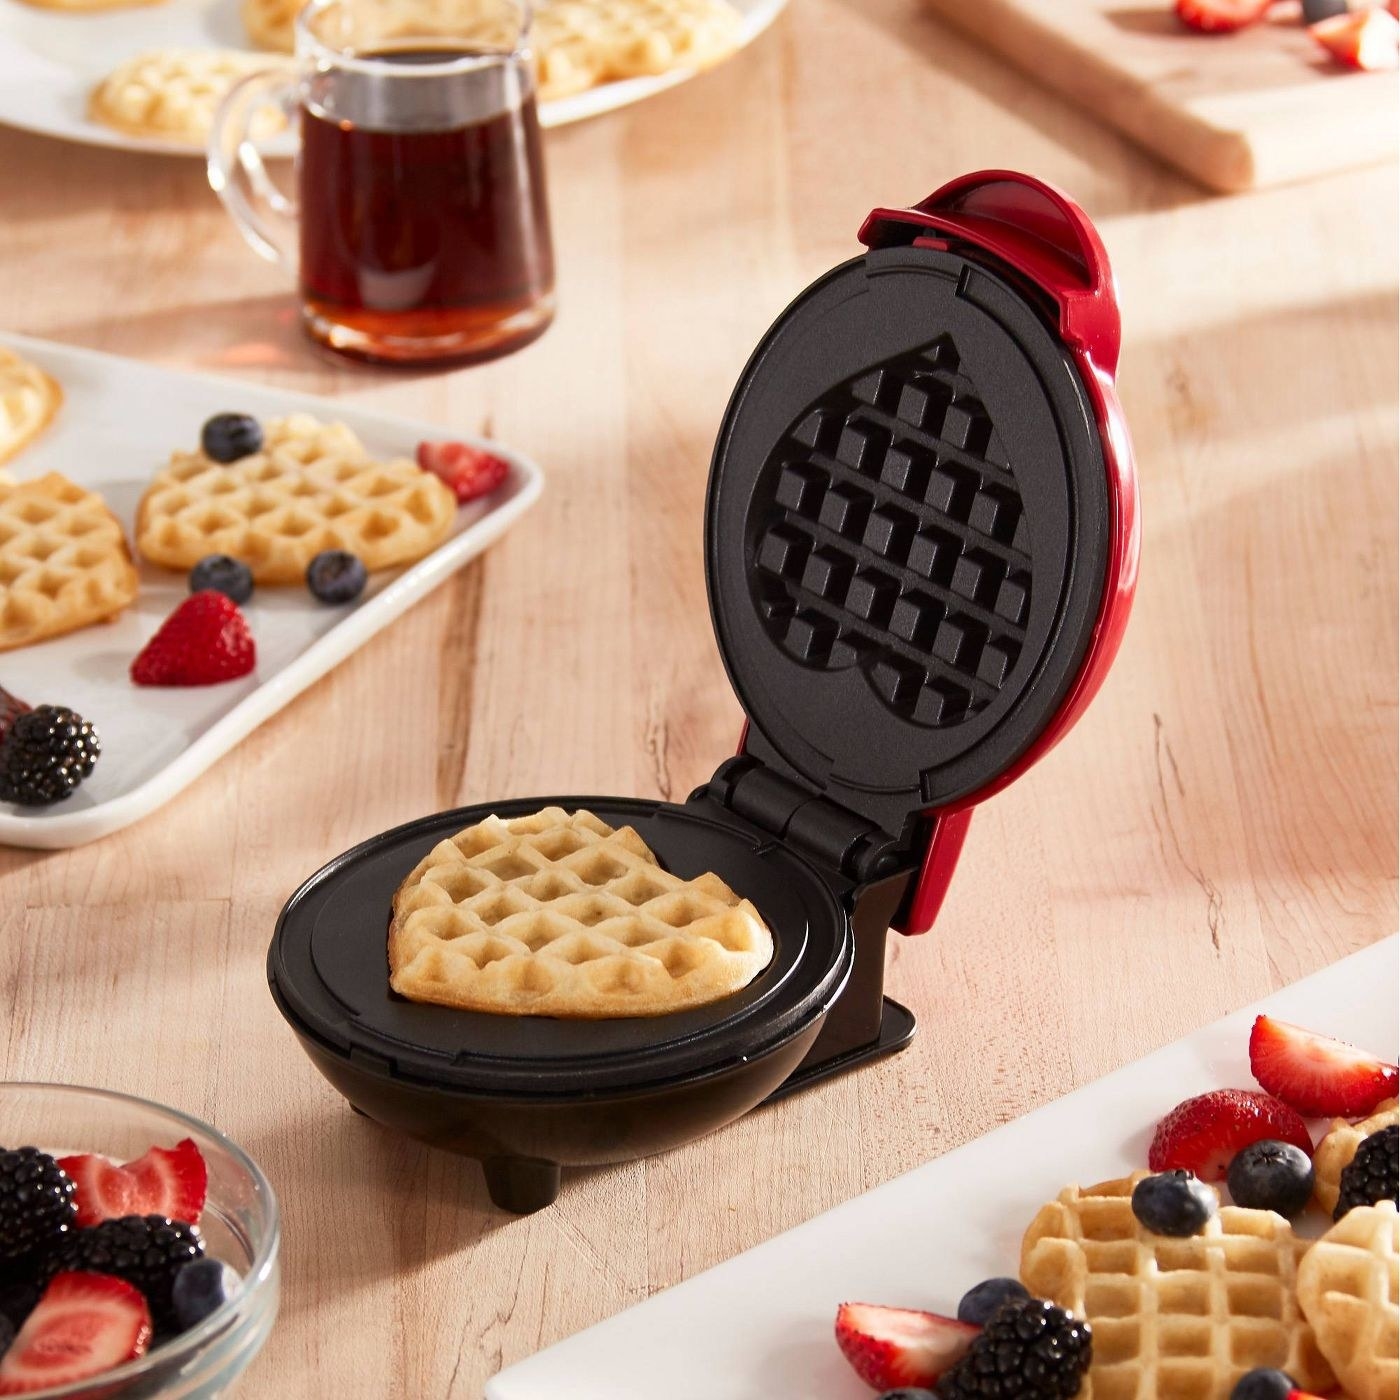 DAETNG Electric Waffle Maker Iron Machine Making Heart Shaped Waffles Ideal Kitchen Tool Non Stick Deep Cooking Plates with Temperature Control